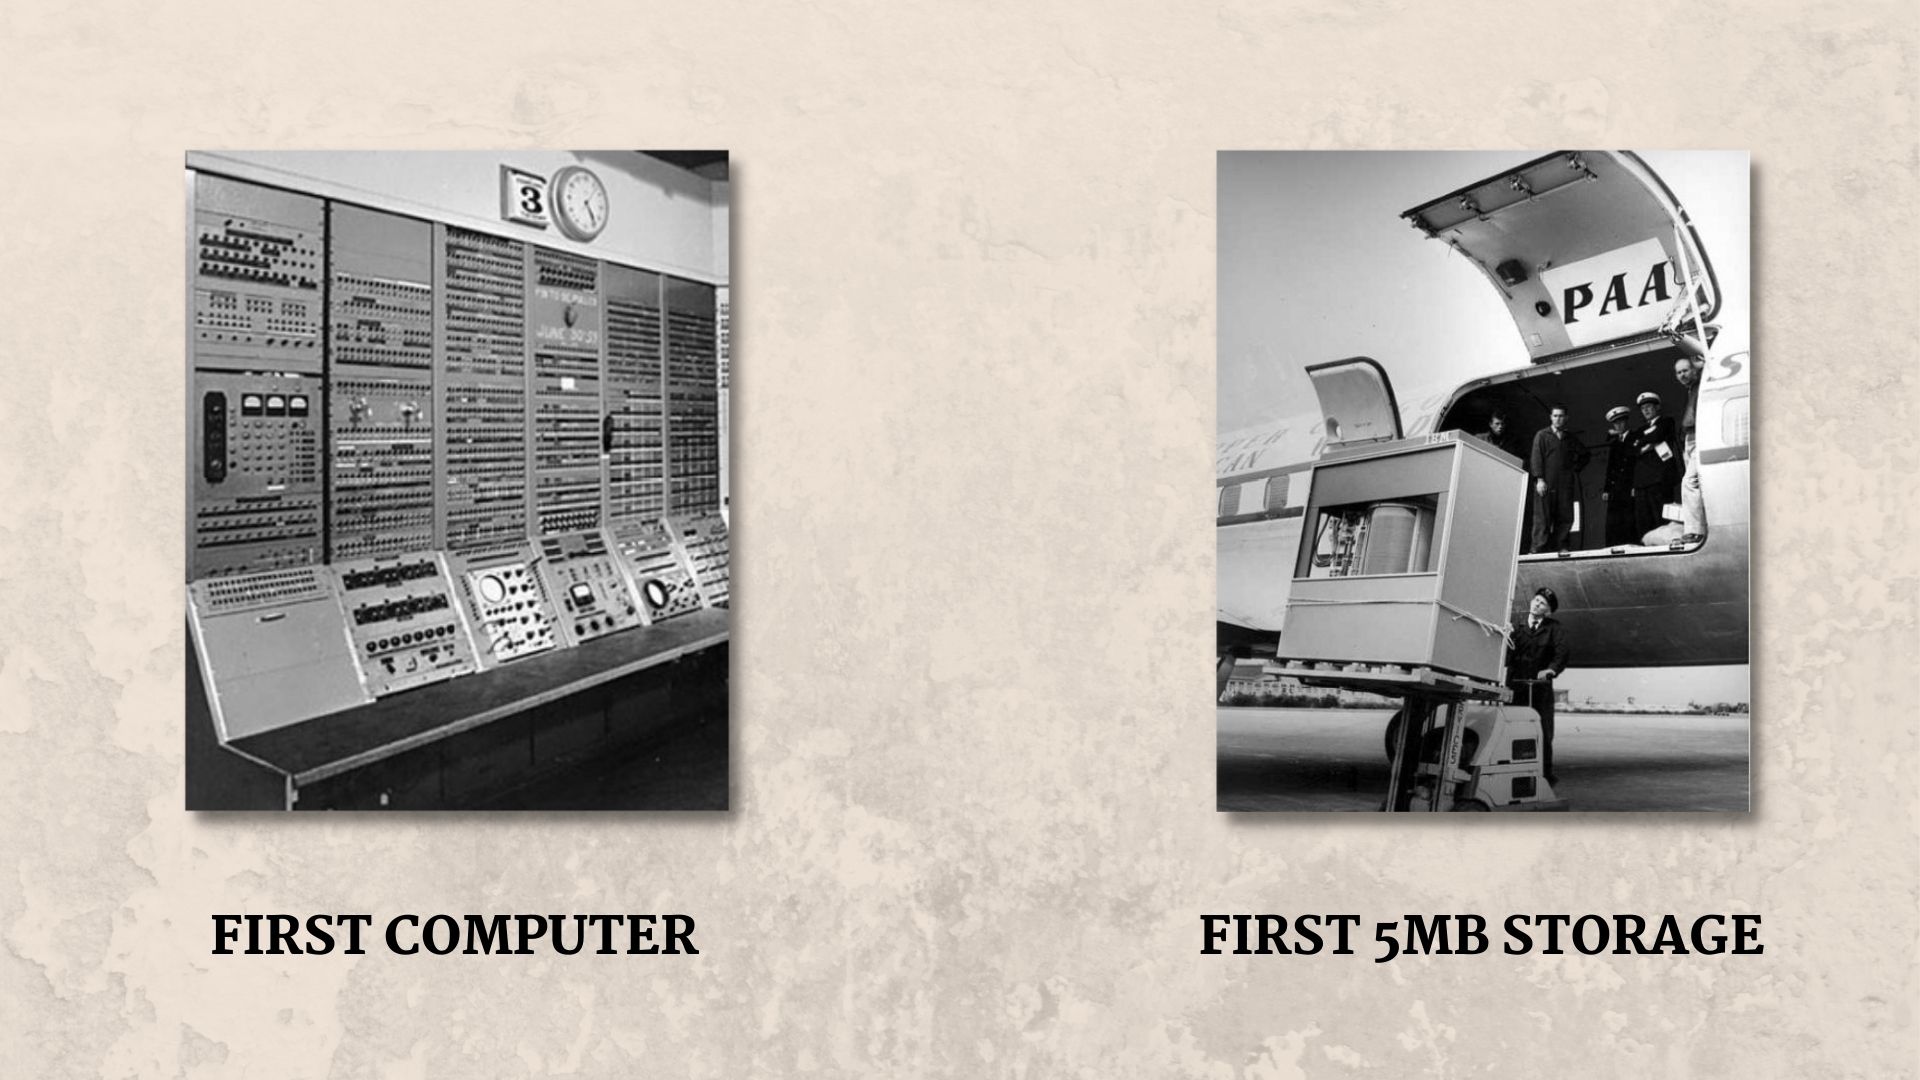 FIRST COMPUTER AND 5MB STORAGE